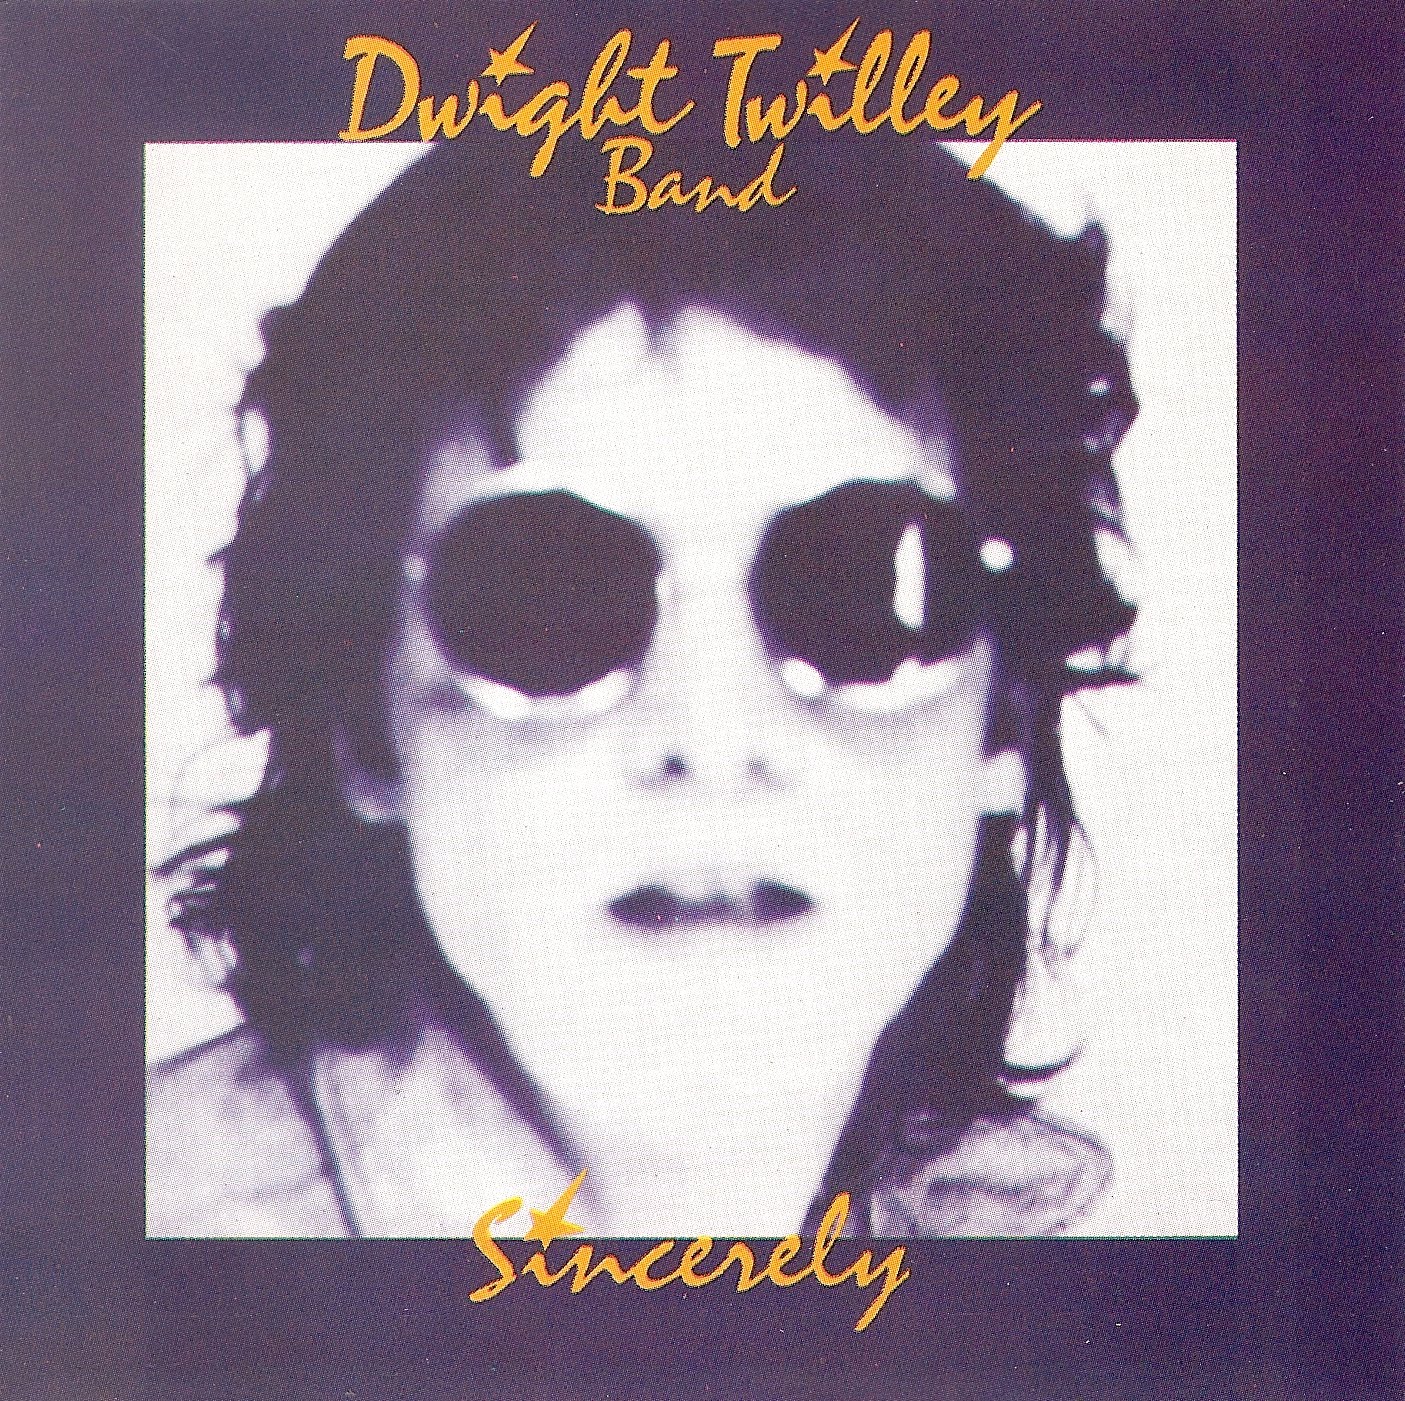 Sincerely - Dwight Twilley Band